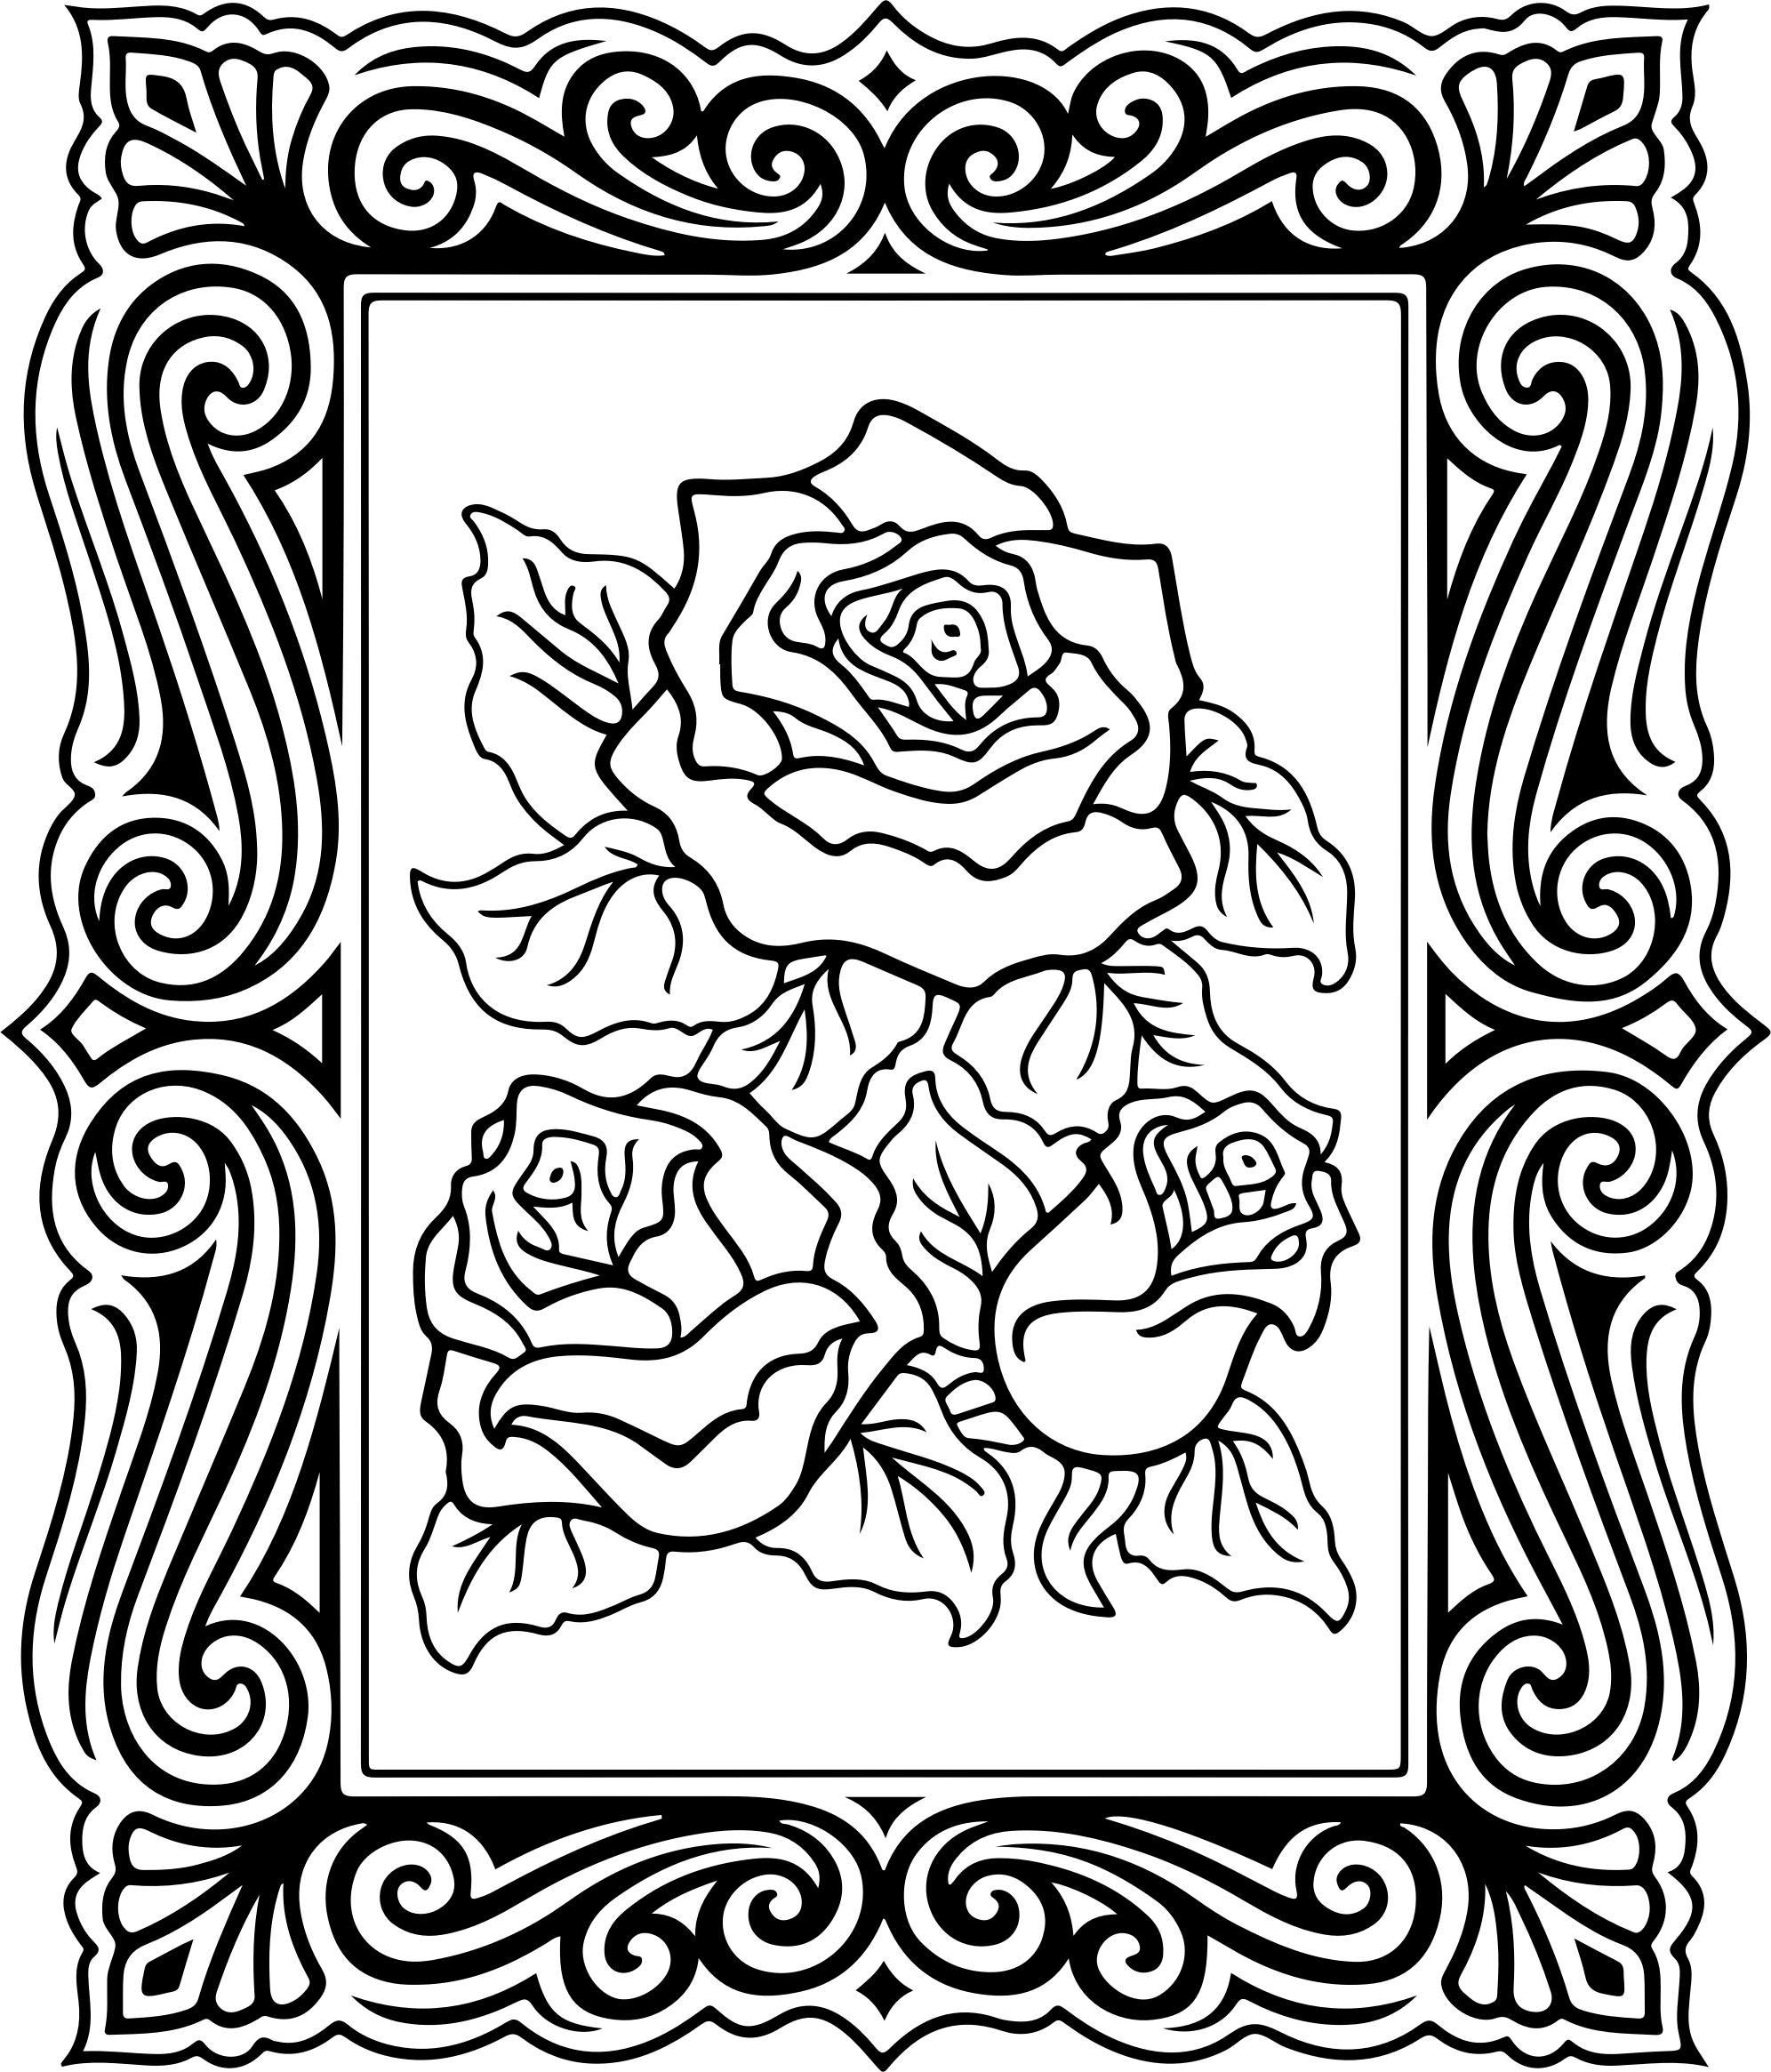 Roses With Decorative Border png